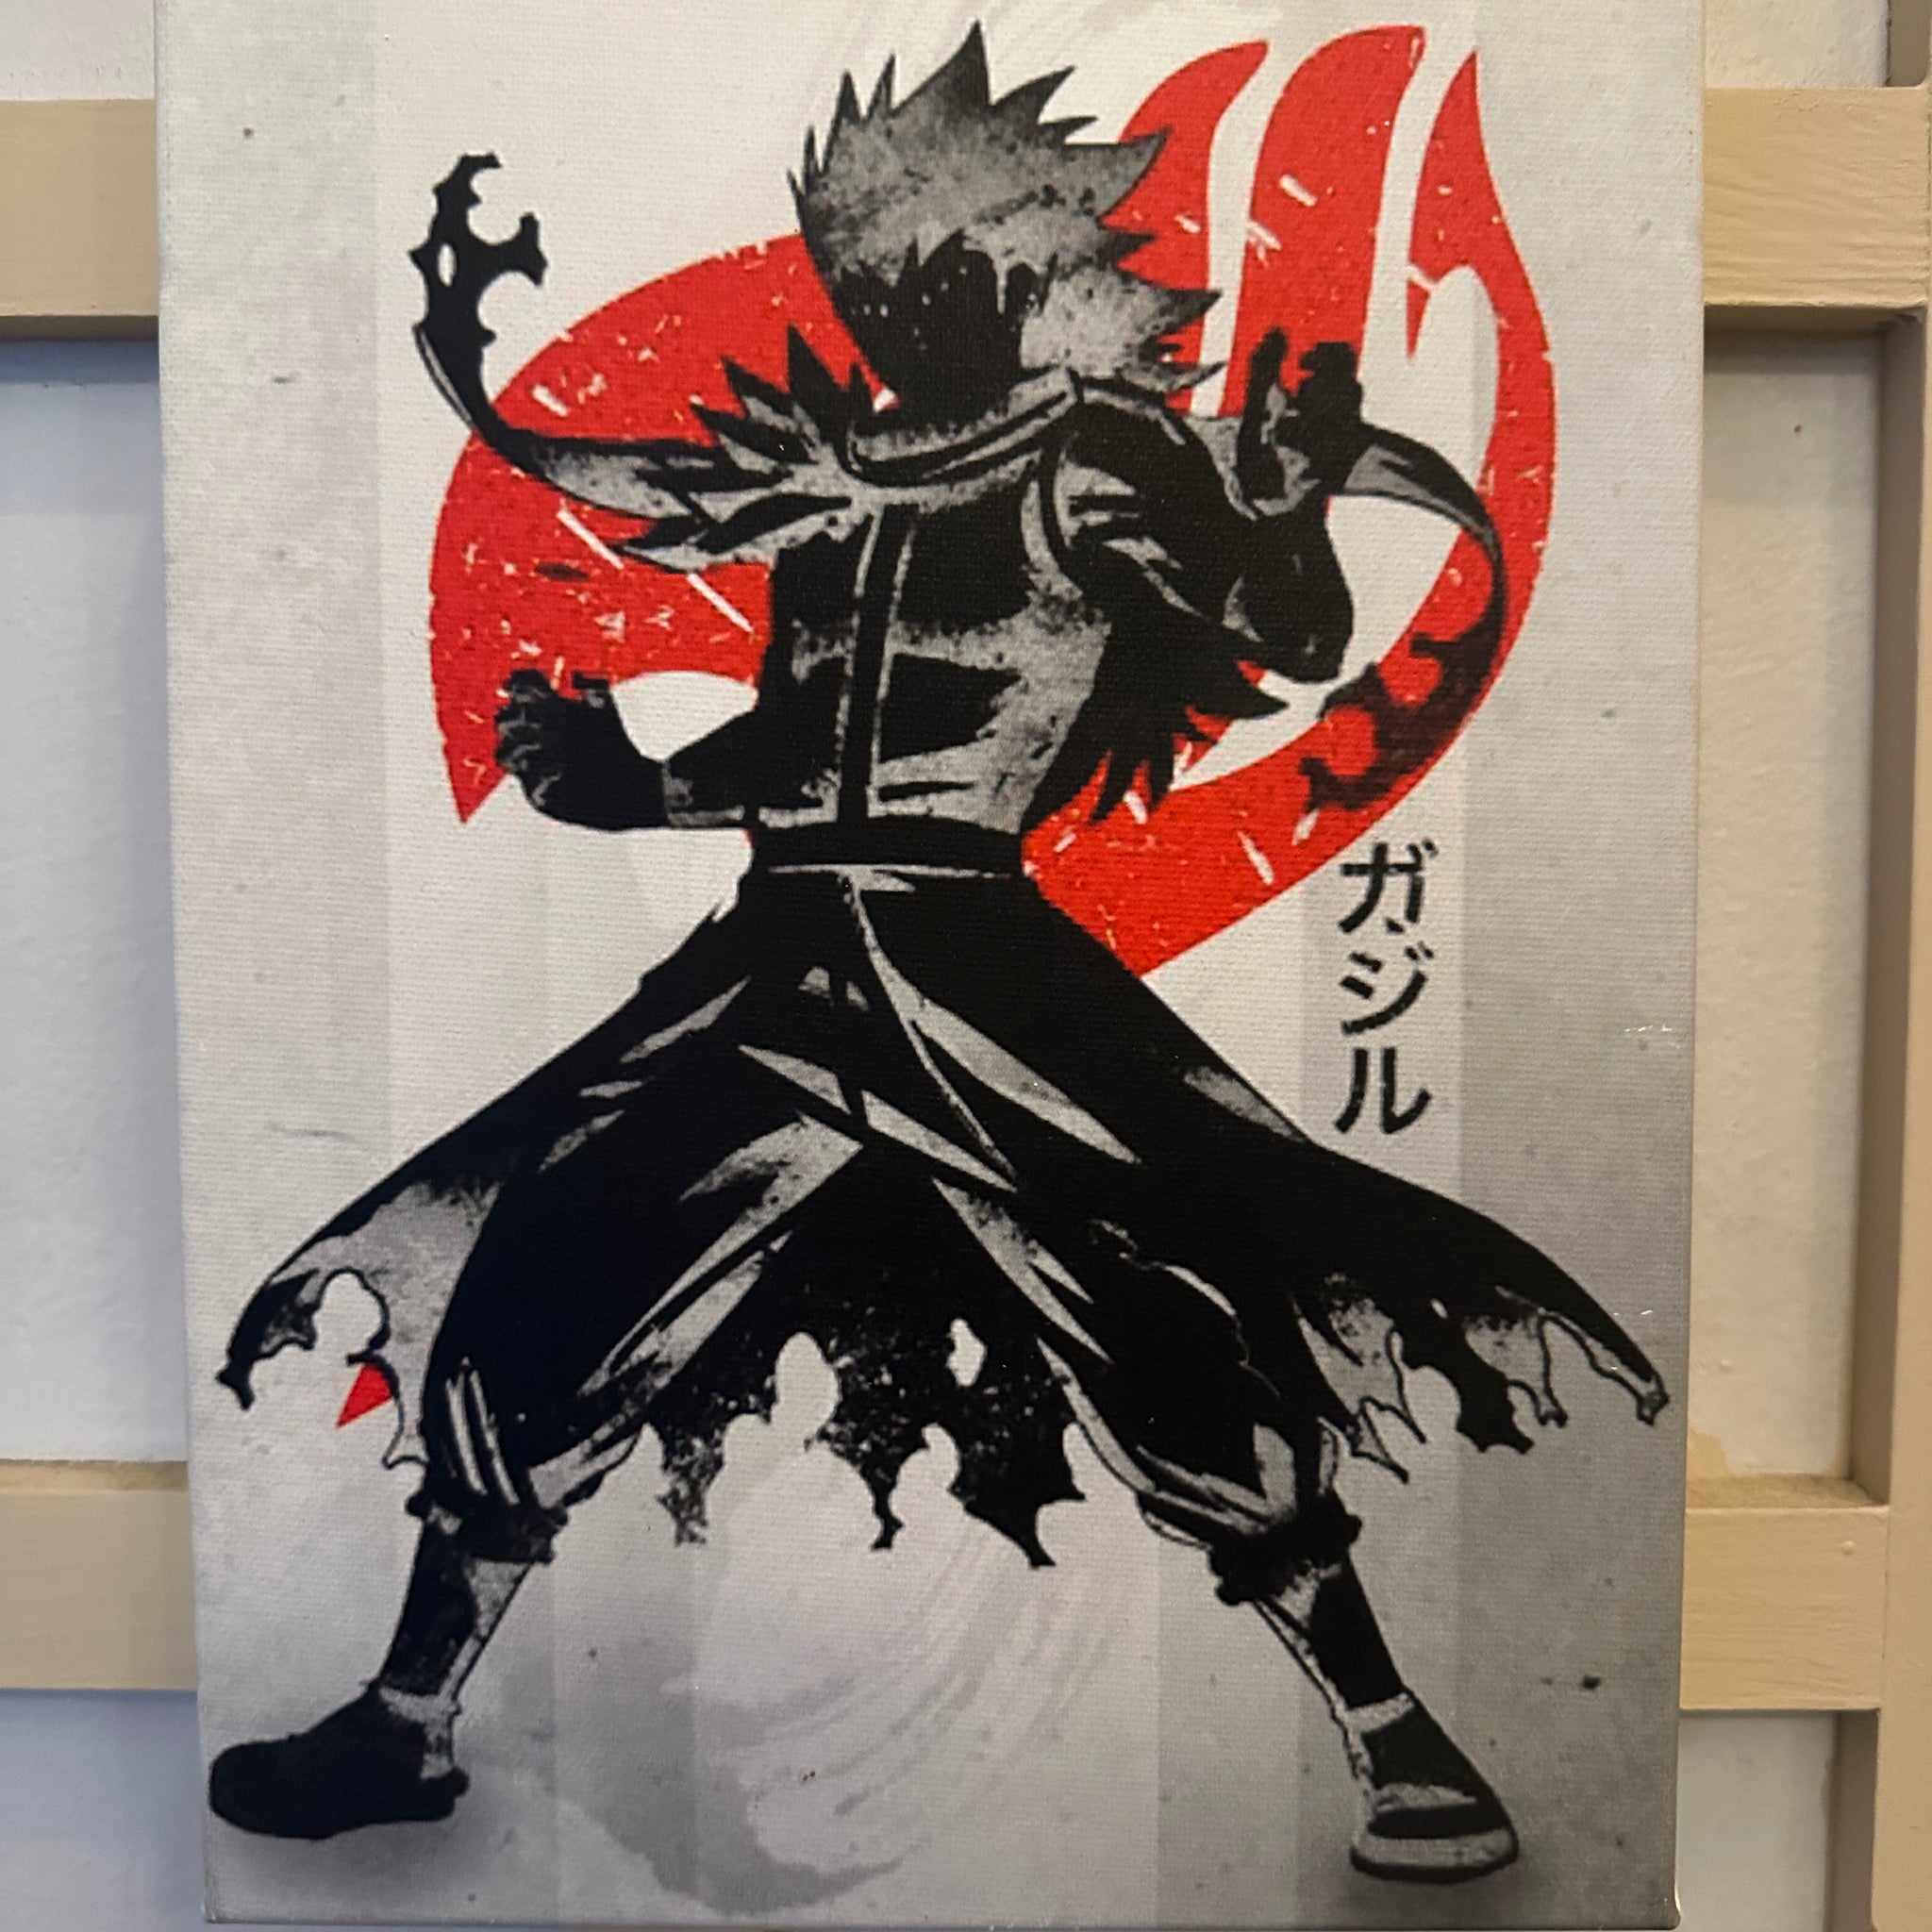 ONLY ONE AVAILABLE-  HAND MADE -ANIME FAIRY TAIL - GAJEEL REDFOX  ART ON CANVA - FREE DELIVERY